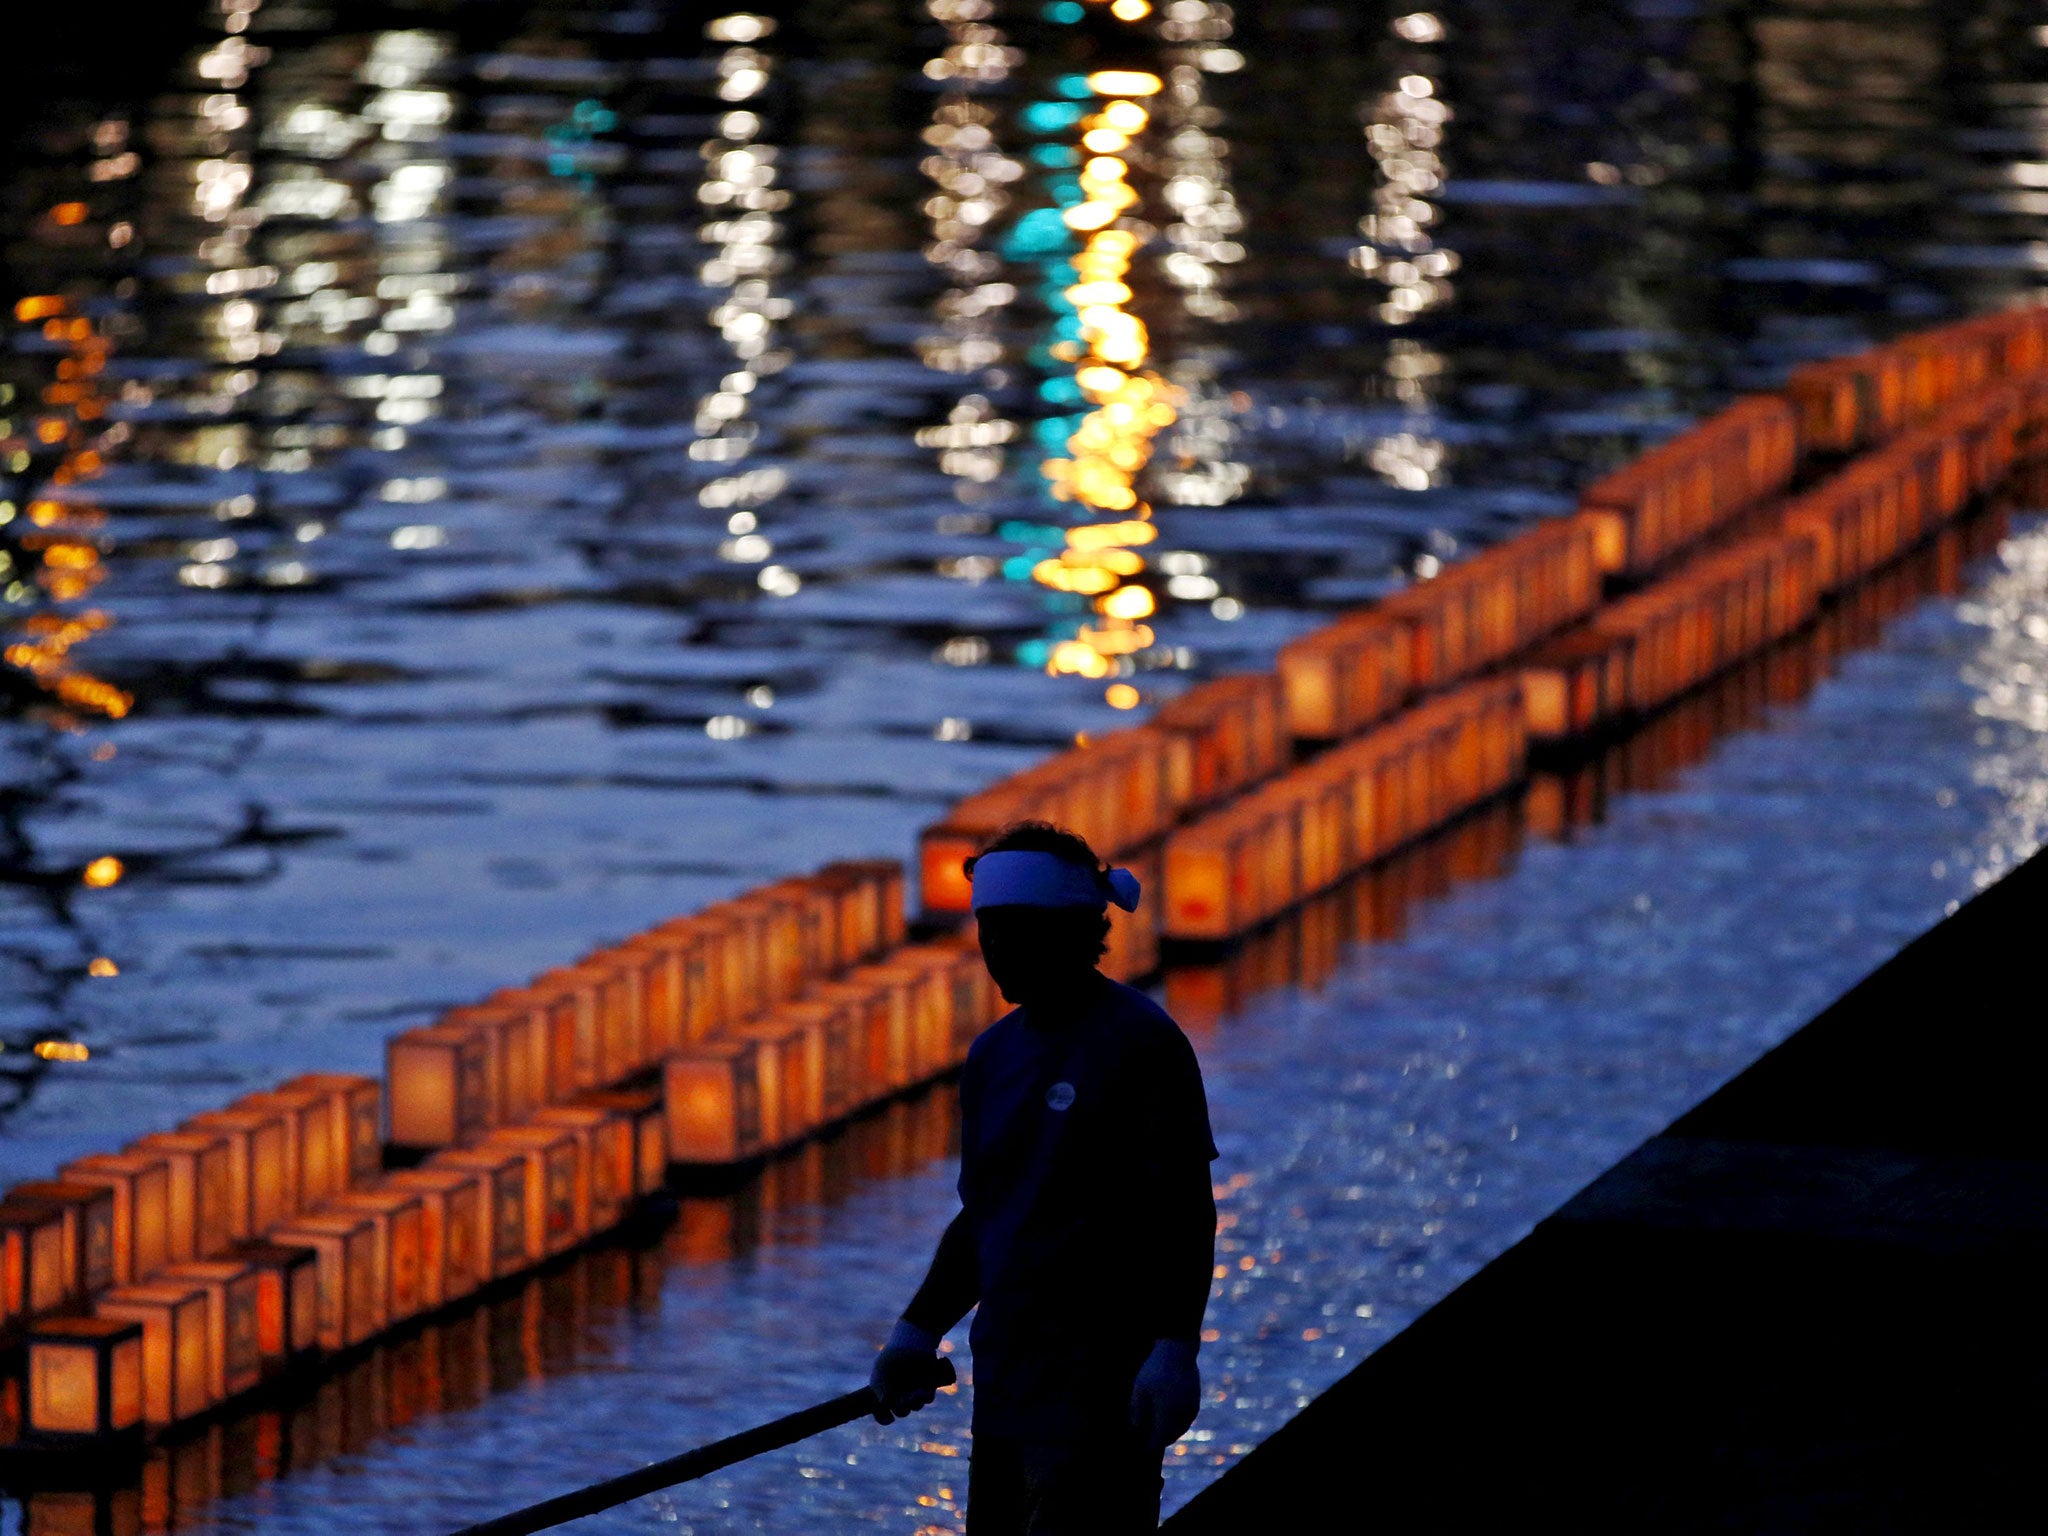 Lanterns adorn the Urakami river in Nagasaki in commemoration of the bomb that would claim 168,000 lives and give rise to a constitution that renounced any role in military conflict